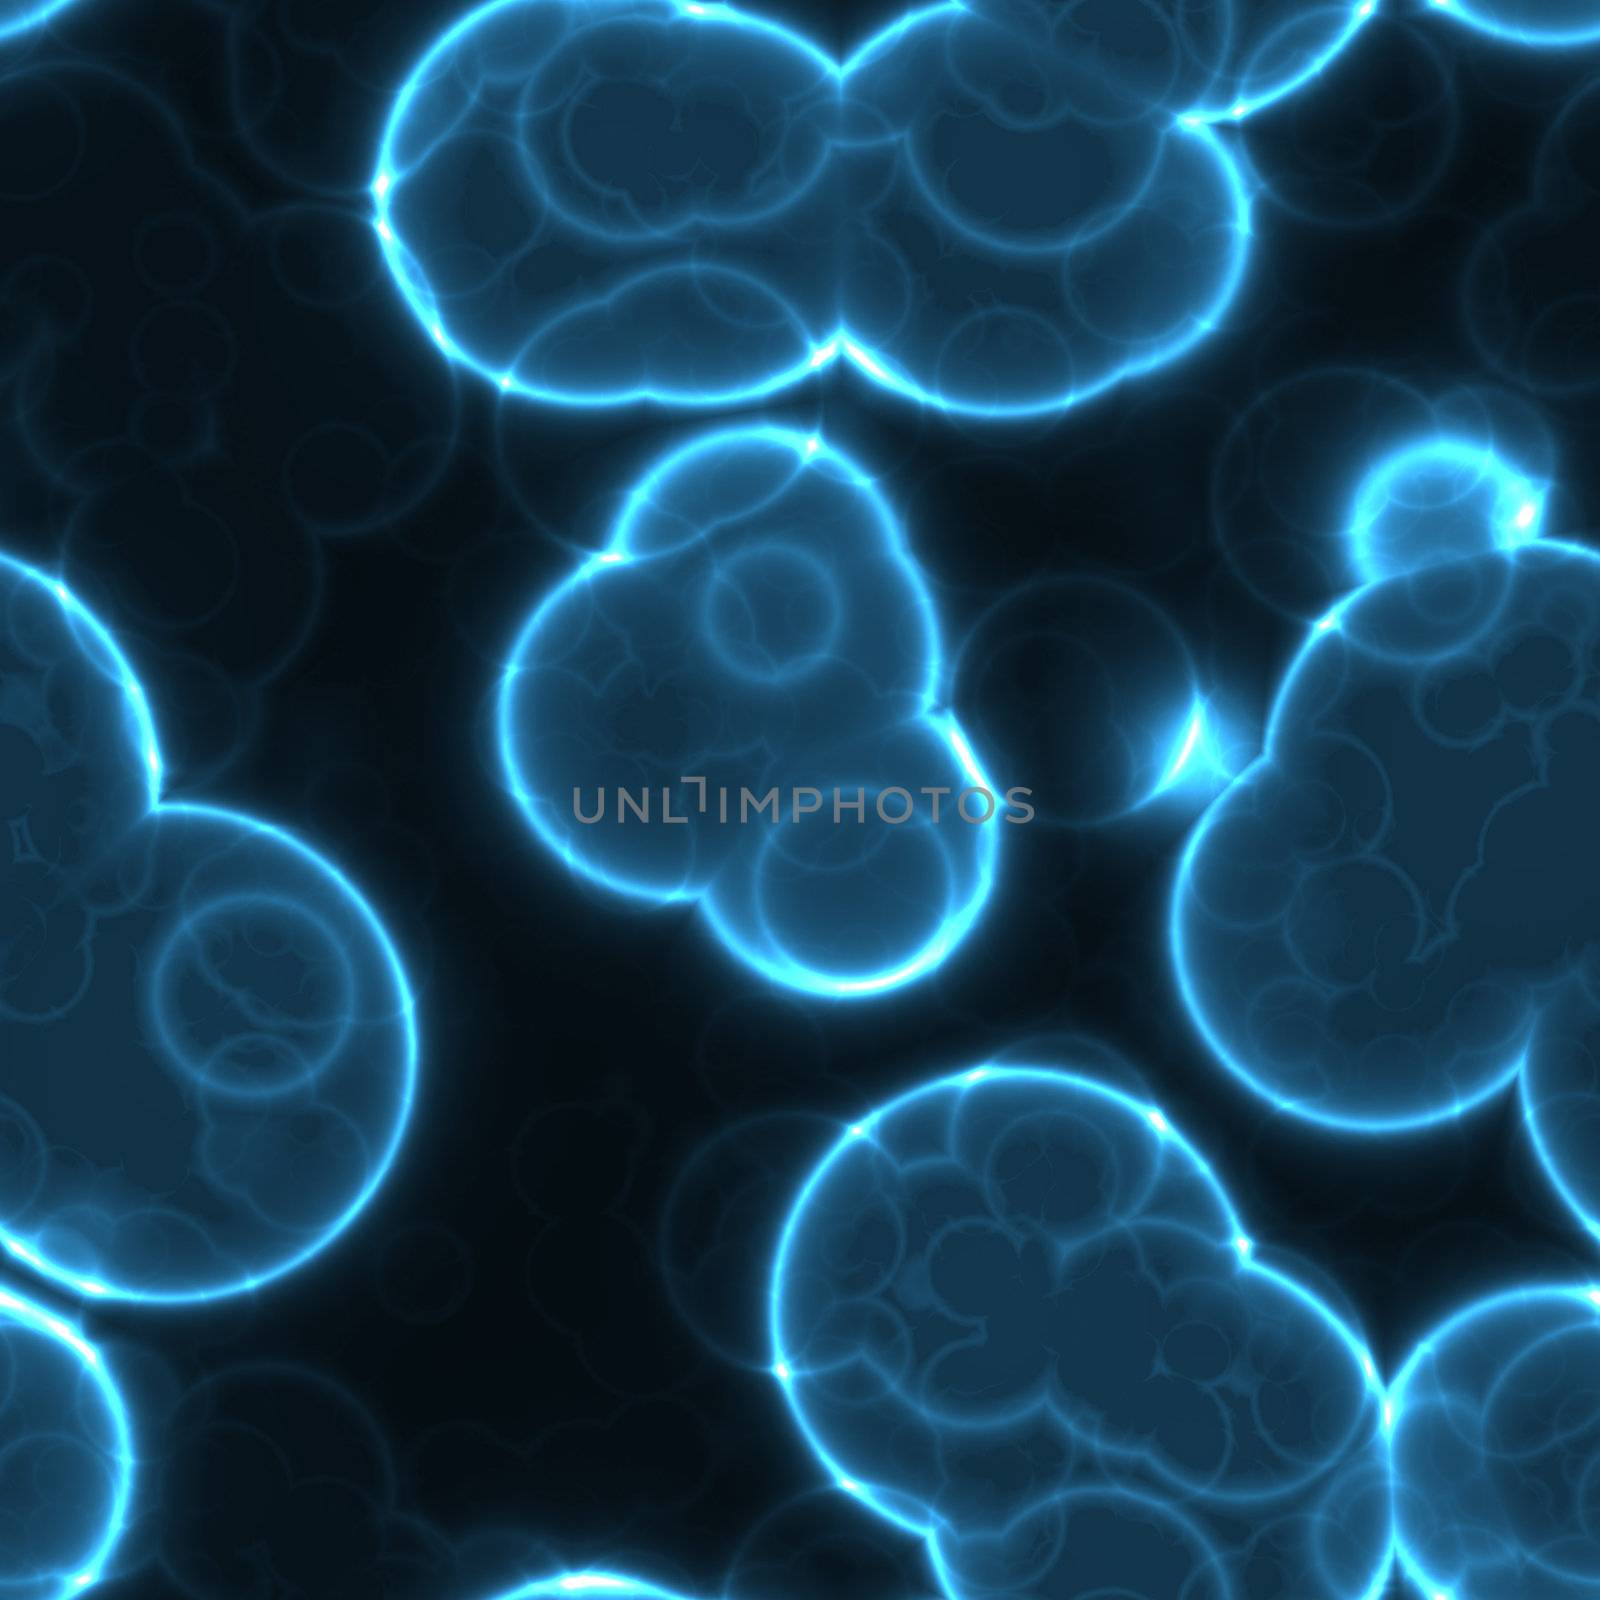 This blue cells background texture also tiles seamlessly as a pattern.